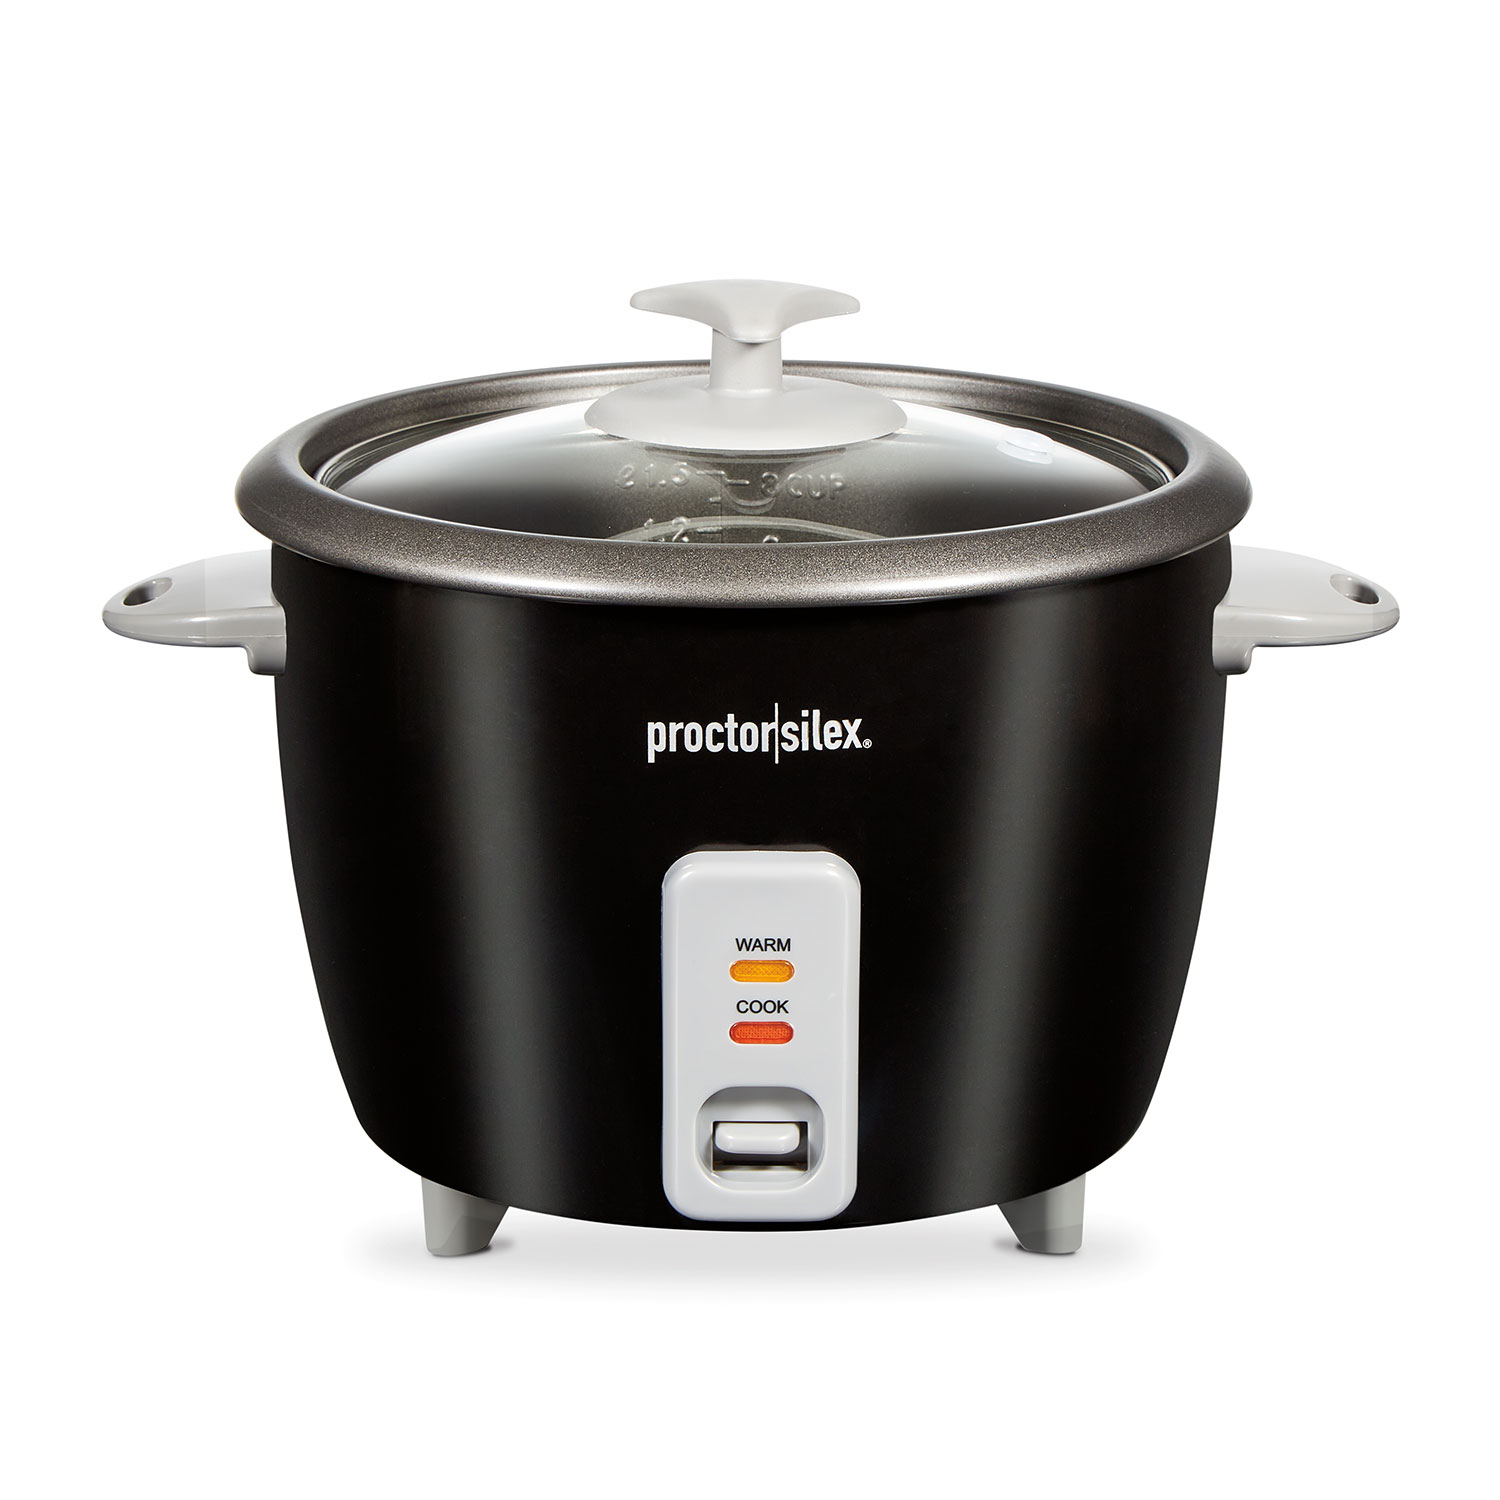 Proctor-Silex Simplicity 4-in-1 Electric Pressure Cooker, 3 Quart Multi-function with Slow Cook, Steam, Sauté, Rice, Stainless Steel (34503)